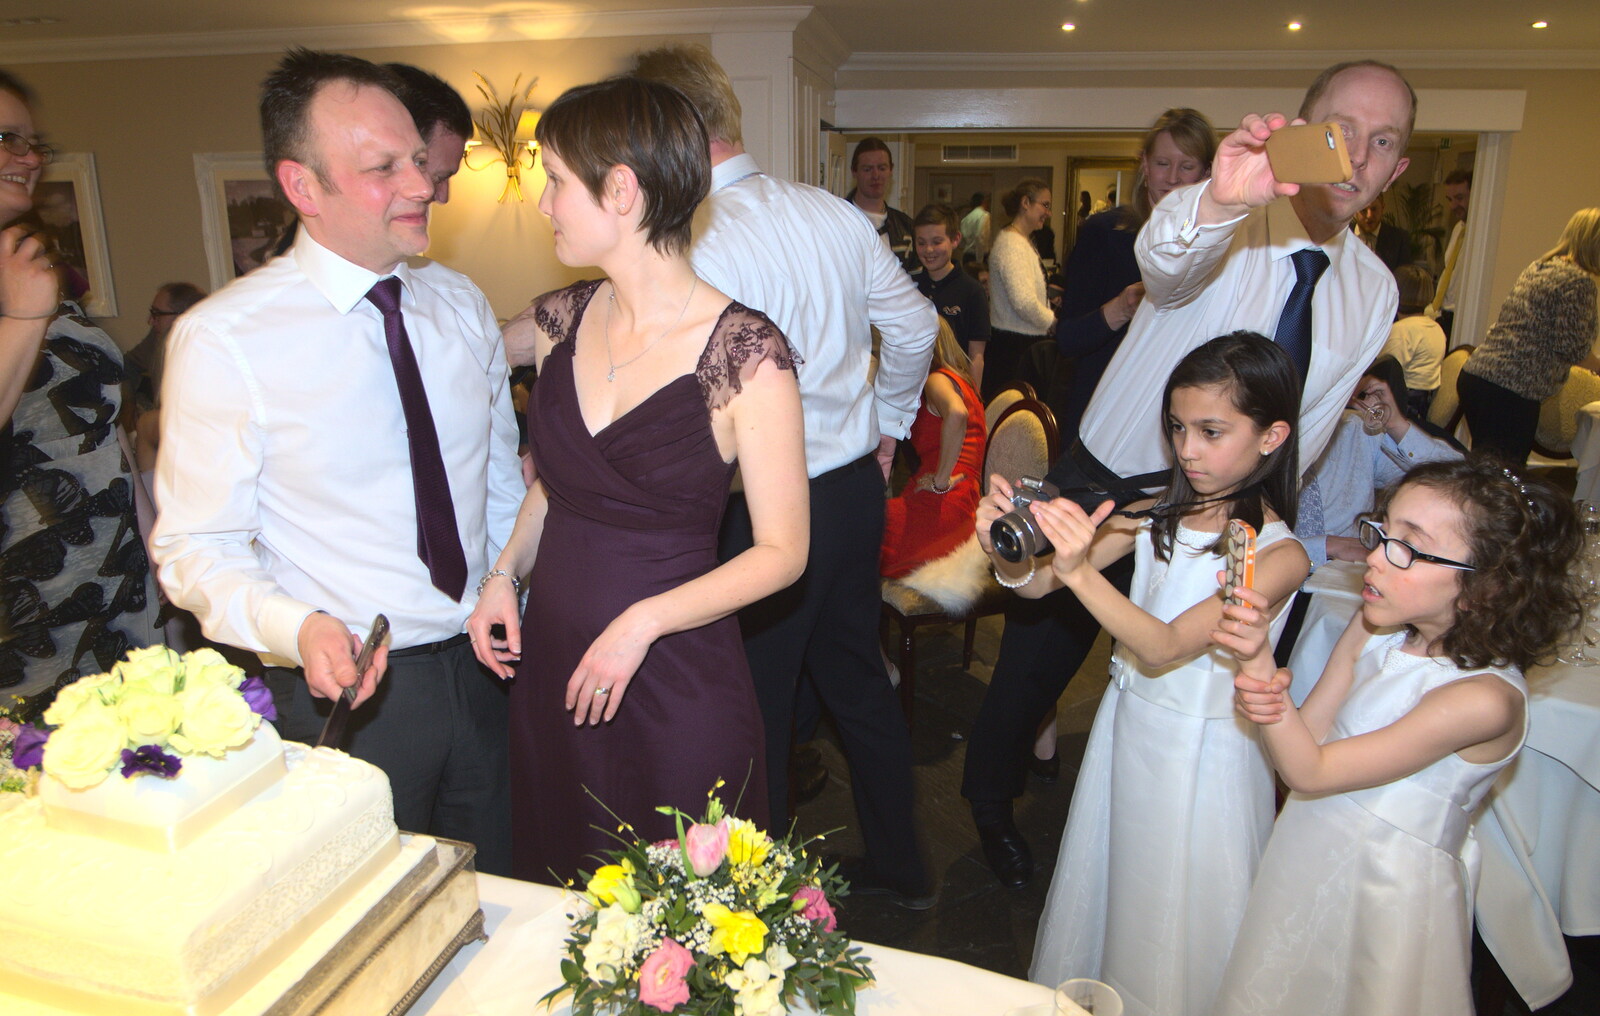 The cutting of the cake from John and Caroline's Wedding, Sheene Mill, Melbourne, Cambridgeshire - 8th March 2014